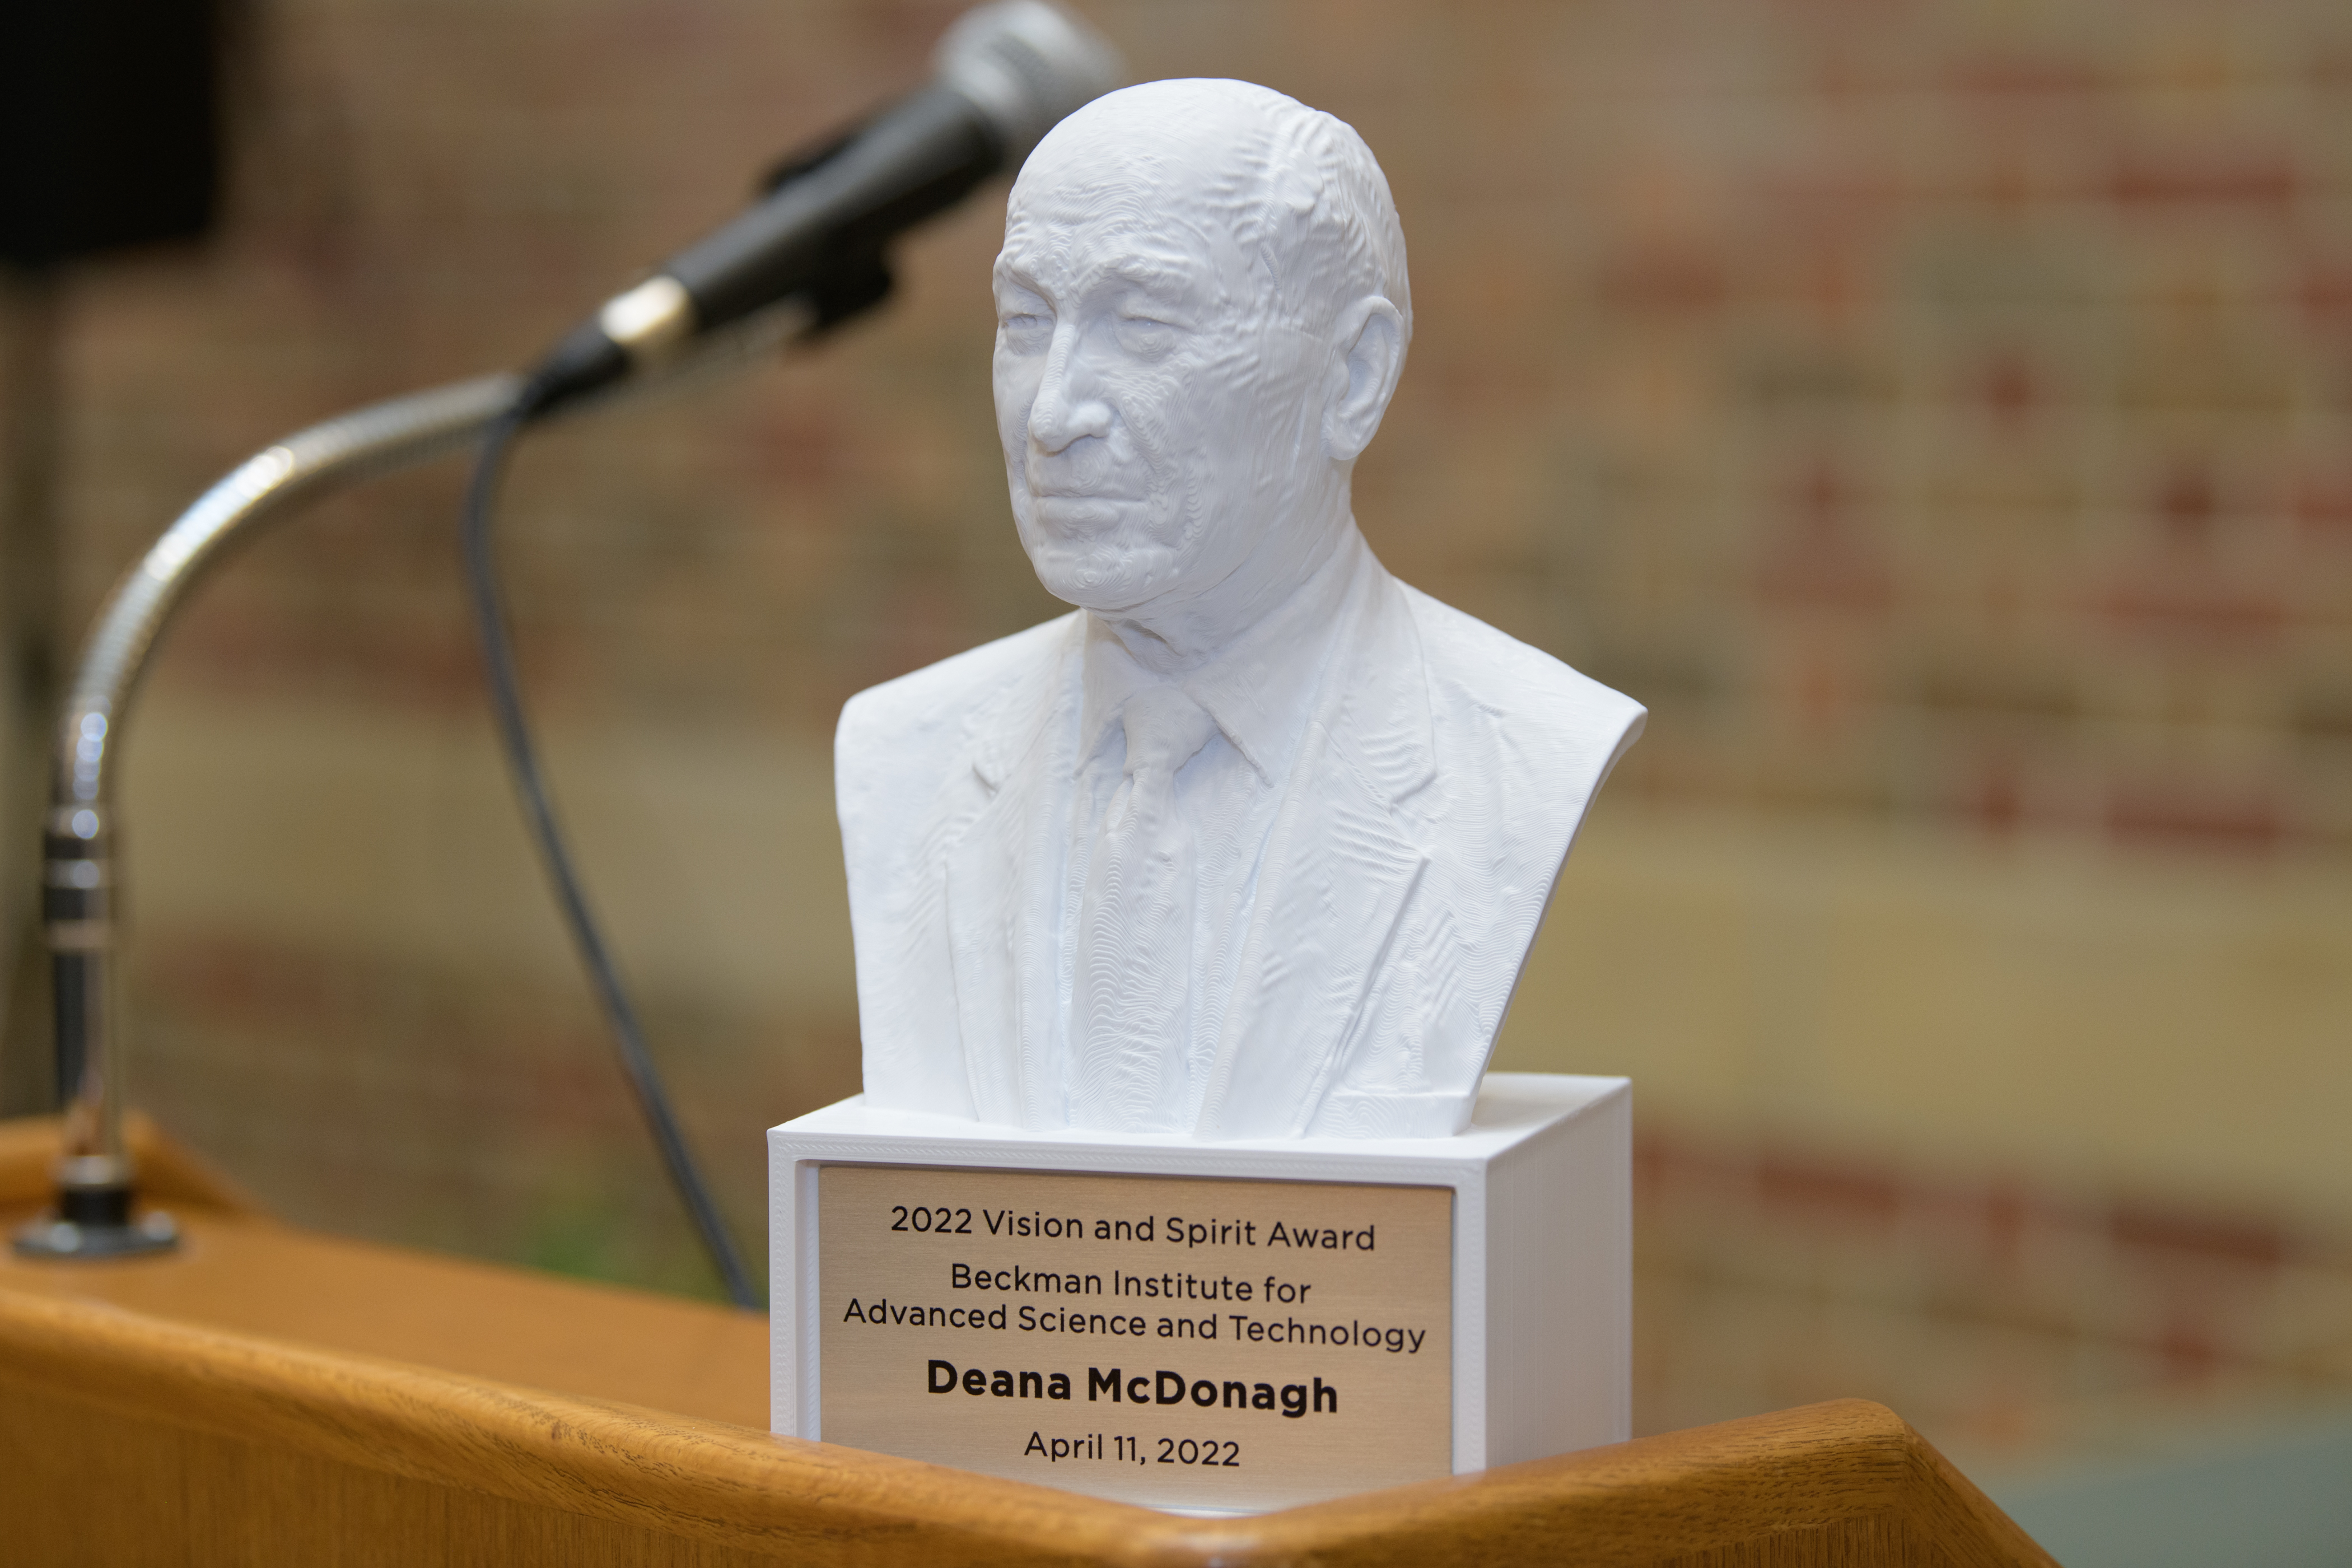 Bust of Arnold O. Beckman awarded to Deana McDonagh for the 2022 Vision and Spirit Award